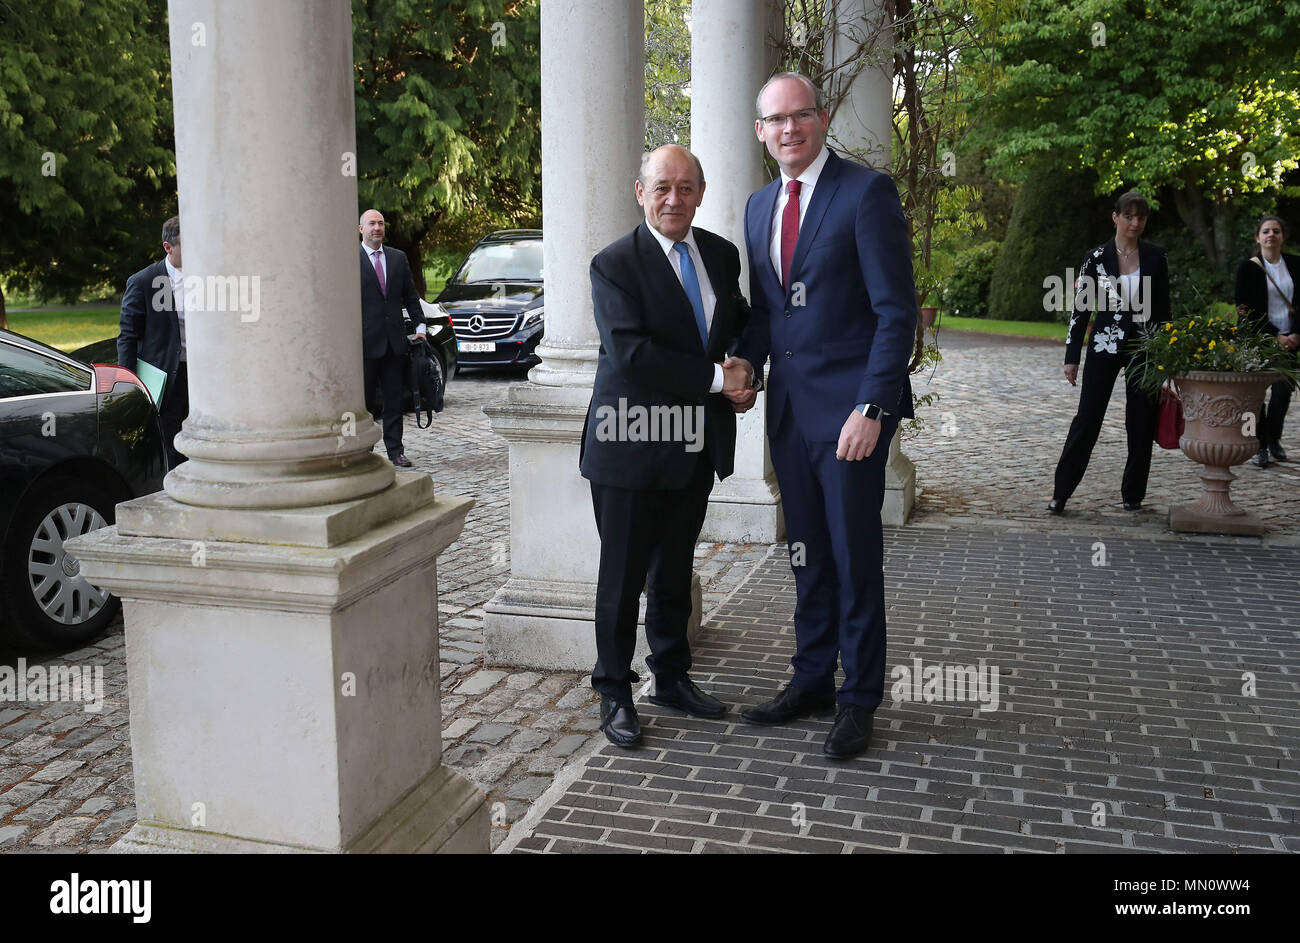 The T‡naiste and Minister for Foreign Affairs and Trade, Mr. Simon Coveney T.D (right) with French Minister for Europe and Foreign Affairs, Mr. Jean-Yves Le Drian at a meeting at Farmleigh House in Phoenix Park, Dublin . Stock Photo